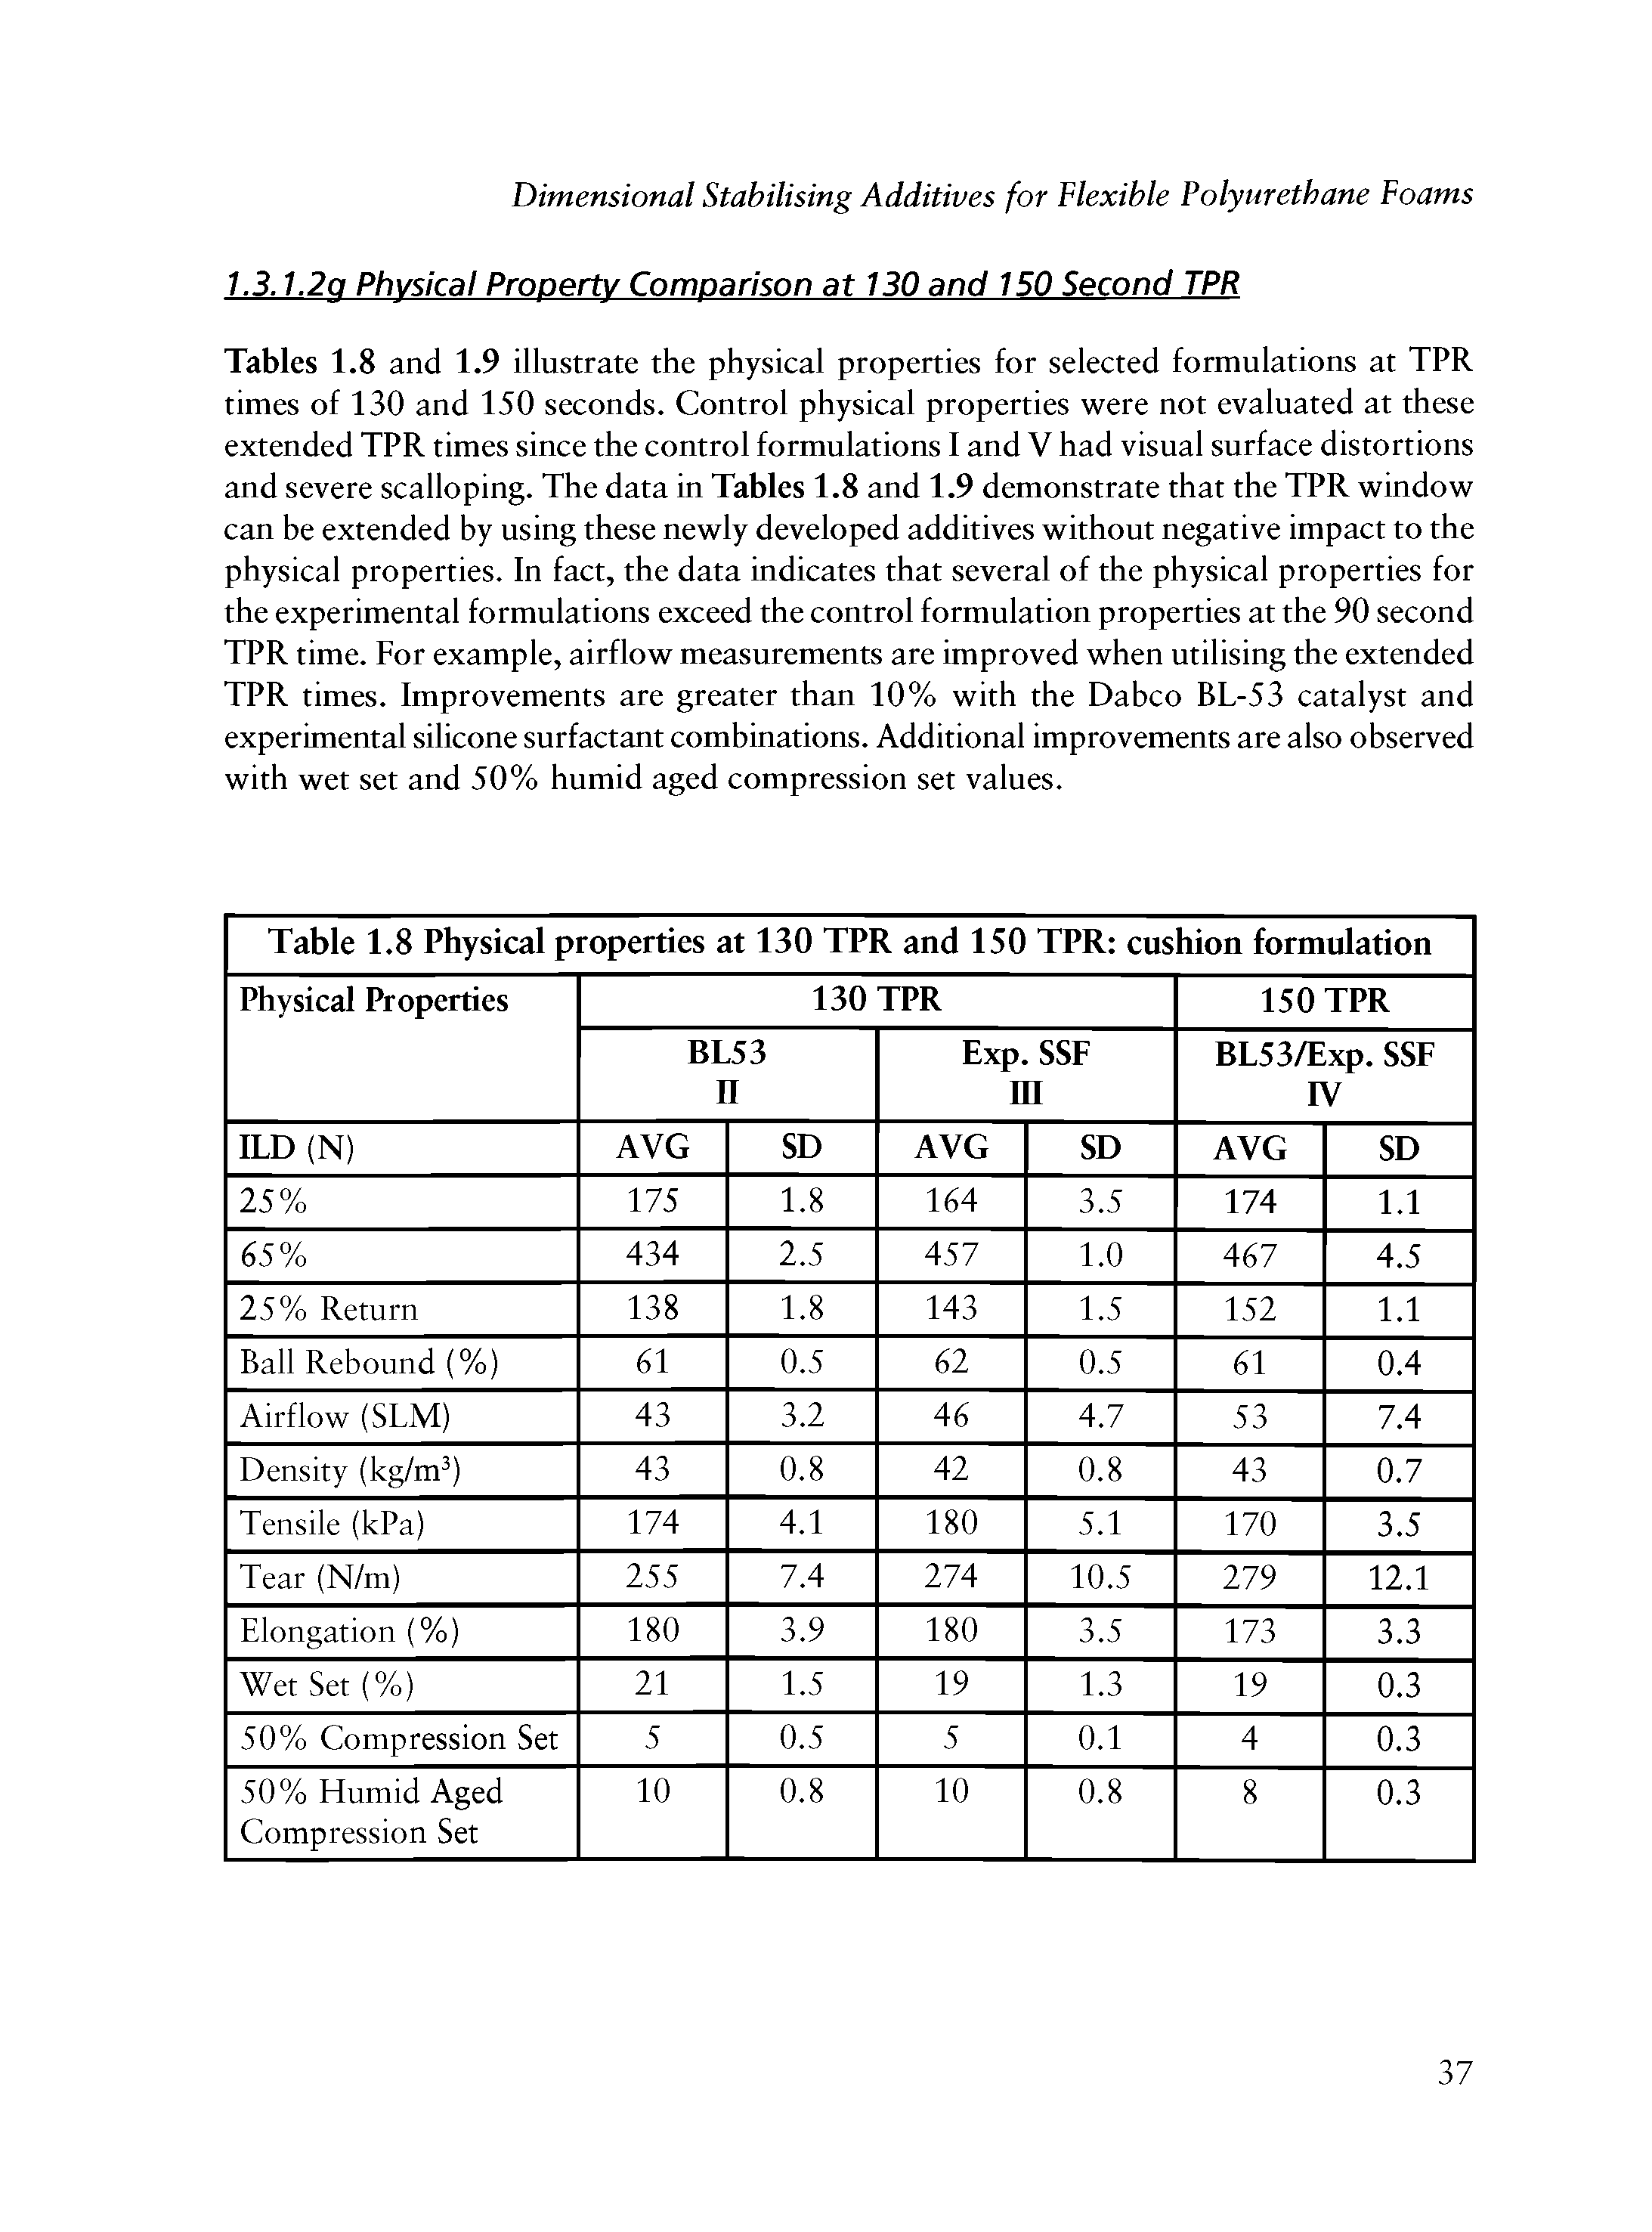 Tables 1.8 and 1.9 illustrate the physical properties for selected formulations at TPR times of 130 and 150 seconds. Control physical properties were not evaluated at these extended TPR times since the control formulations I and V had visual surface distortions and severe scalloping. The data in Tables 1.8 and 1.9 demonstrate that the TPR window can be extended by using these newly developed additives without negative impact to the physical properties. In fact, the data indicates that several of the physical properties for the experimental formulations exceed the control formulation properties at the 90 second TPR time. For example, airflow measurements are improved when utilising the extended TPR times. Improvements are greater than 10% with the Dabco BL-53 catalyst and experimental silicone surfactant combinations. Additional improvements are also observed with wet set and 50% humid aged compression set values.